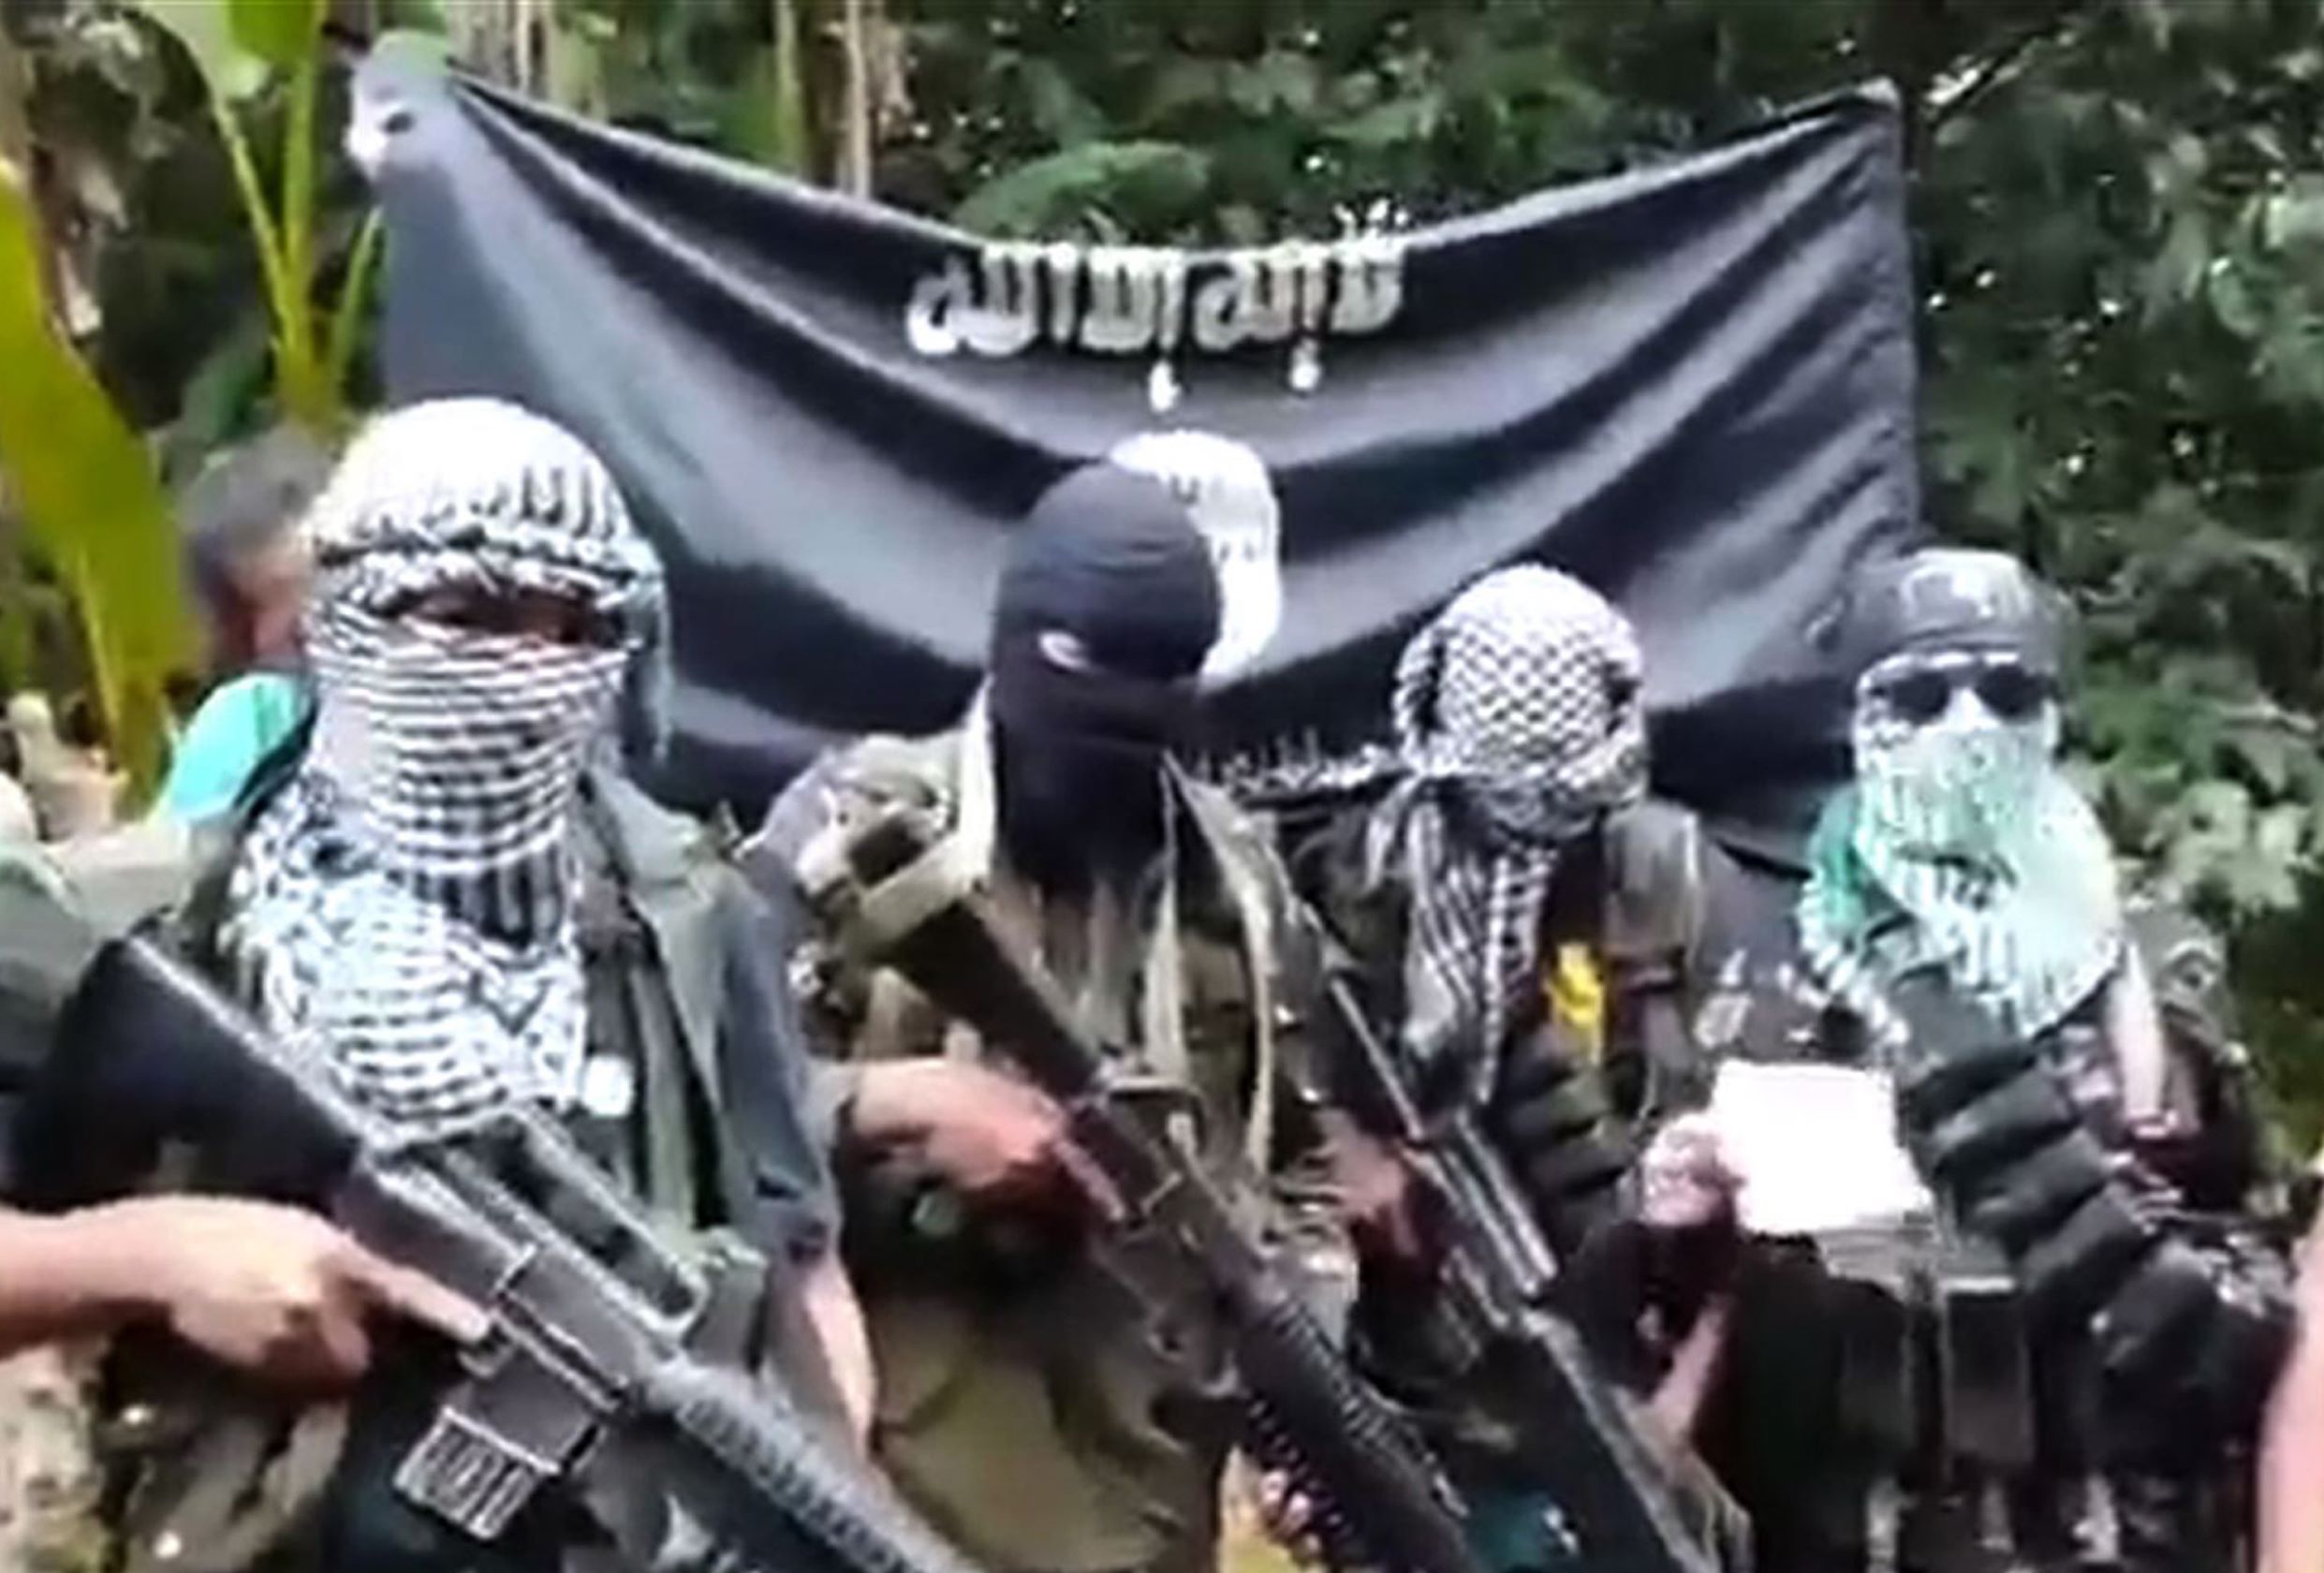 This undated image grab taken on October 13, 2015 from a video uploaded on YouTube shows gunmen standing behind three foreign men (not pictured) and a Filipina (not pictured) who were kidnapped last month in the southern Philippines. Gunmen raided a luxury marina near the major southern city of Davao on September 21, abducting the Norwegian owner of the resort, two Canadian tourists and one of their girlfriends. No group immediately claimed responsibility but the video uploaded on YouTube on October 13 appeared to confirm it was the Abu Sayyaf, which has a long history of kidnappings-for-ransom in the southern Philippines. In the video, the three foreigners appealed for Philippine authorities to halt military assaults against the gunmen. AFP PHOTO / YOUTUBE ---EDITORS NOTE--- RESTRICTED TO EDITORIAL USE - MANDATORY CREDIT "AFP PHOTO / YOUTUBE" - NO MARKETING NO ADVERTISING CAMPAIGNS - DISTRIBUTED AS A SERVICE TO CLIENTS - NO ARCHIVES